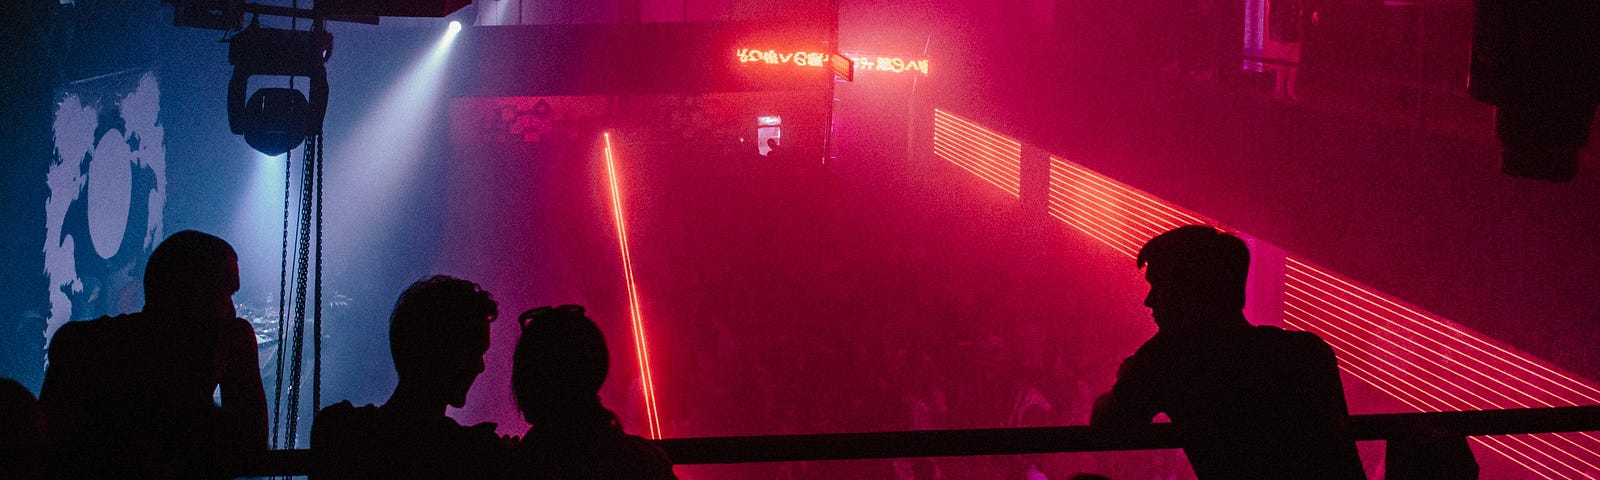 Silhouettes of men leaning against a railing overlooking a dancefloor bathed in pink light.